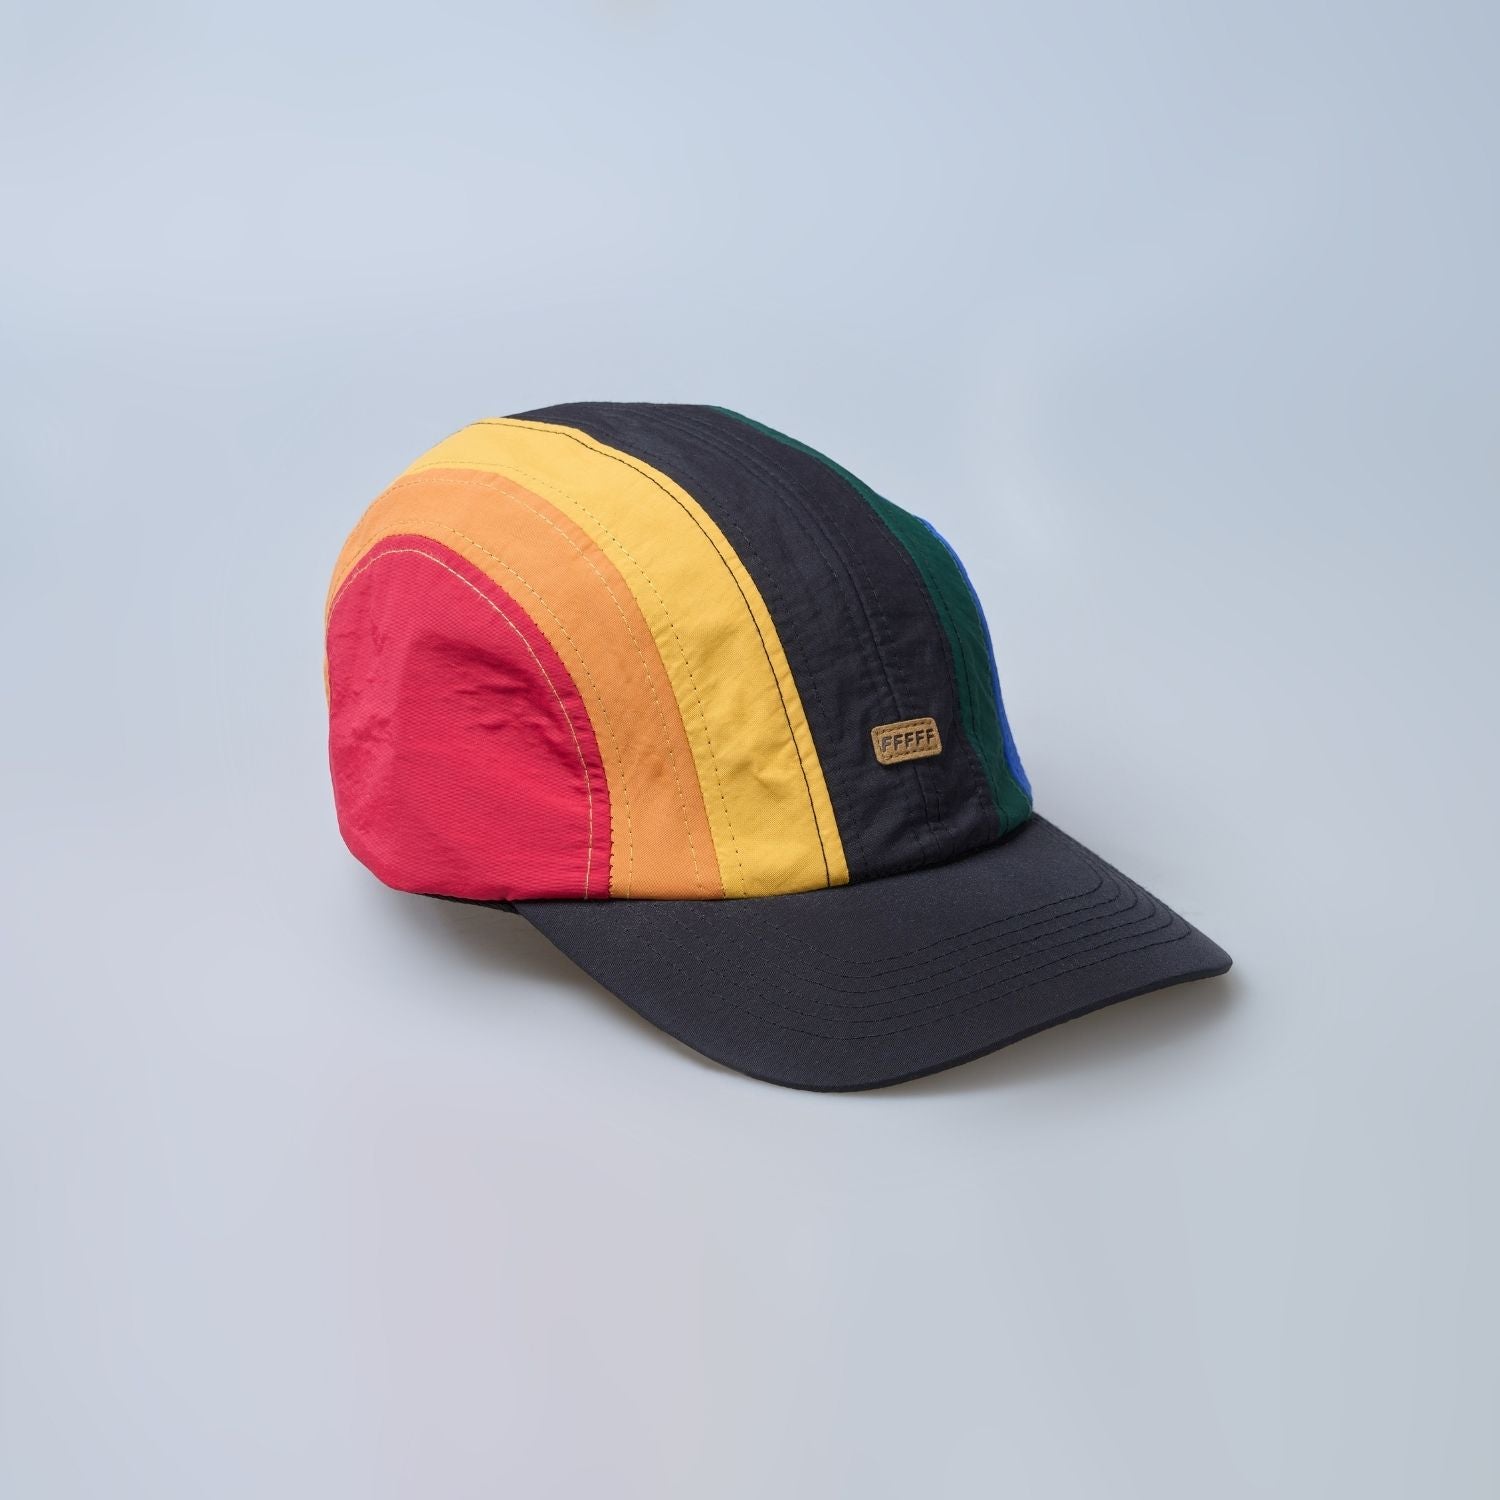 Multi colored, wide brim cap for men with adjustable strap, product view.